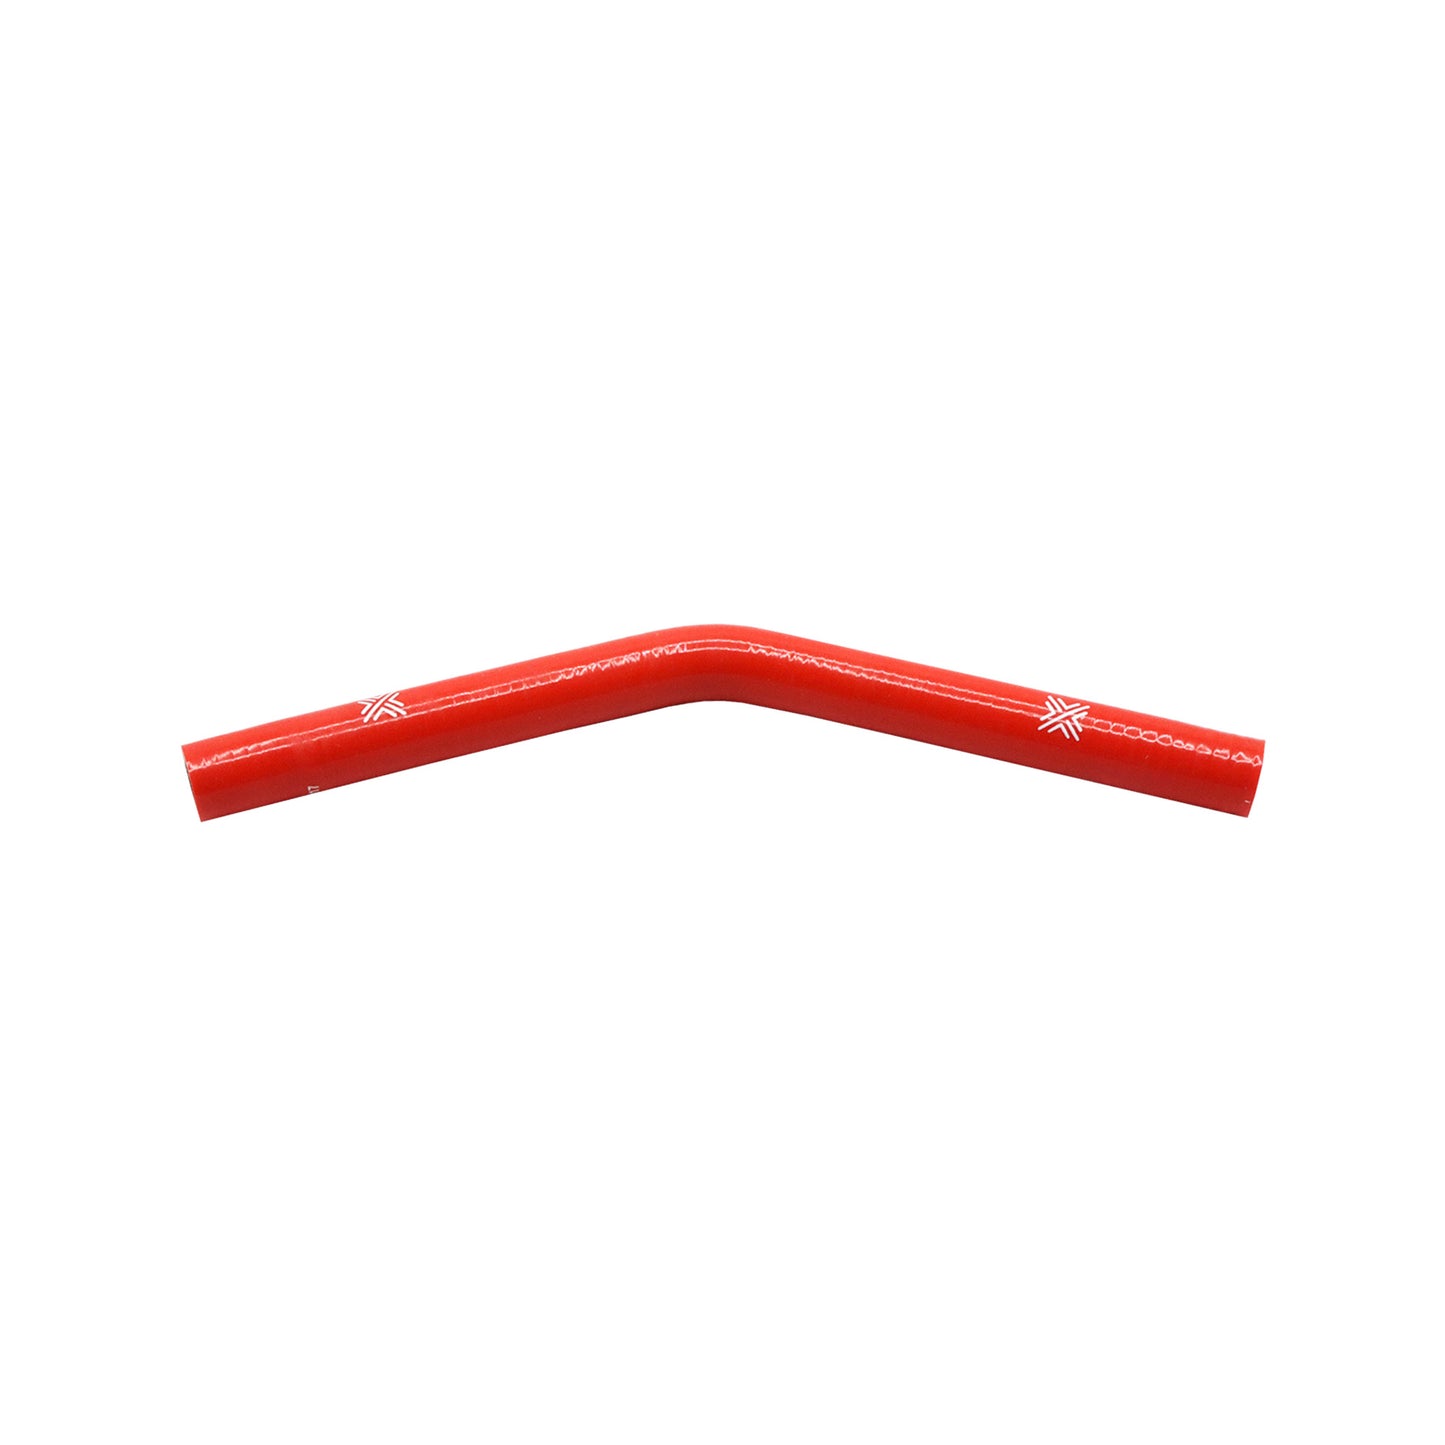 Pipercross Red 45° 12mm Bore, 152mm Leg Length Silicone Hose (FCL04014)